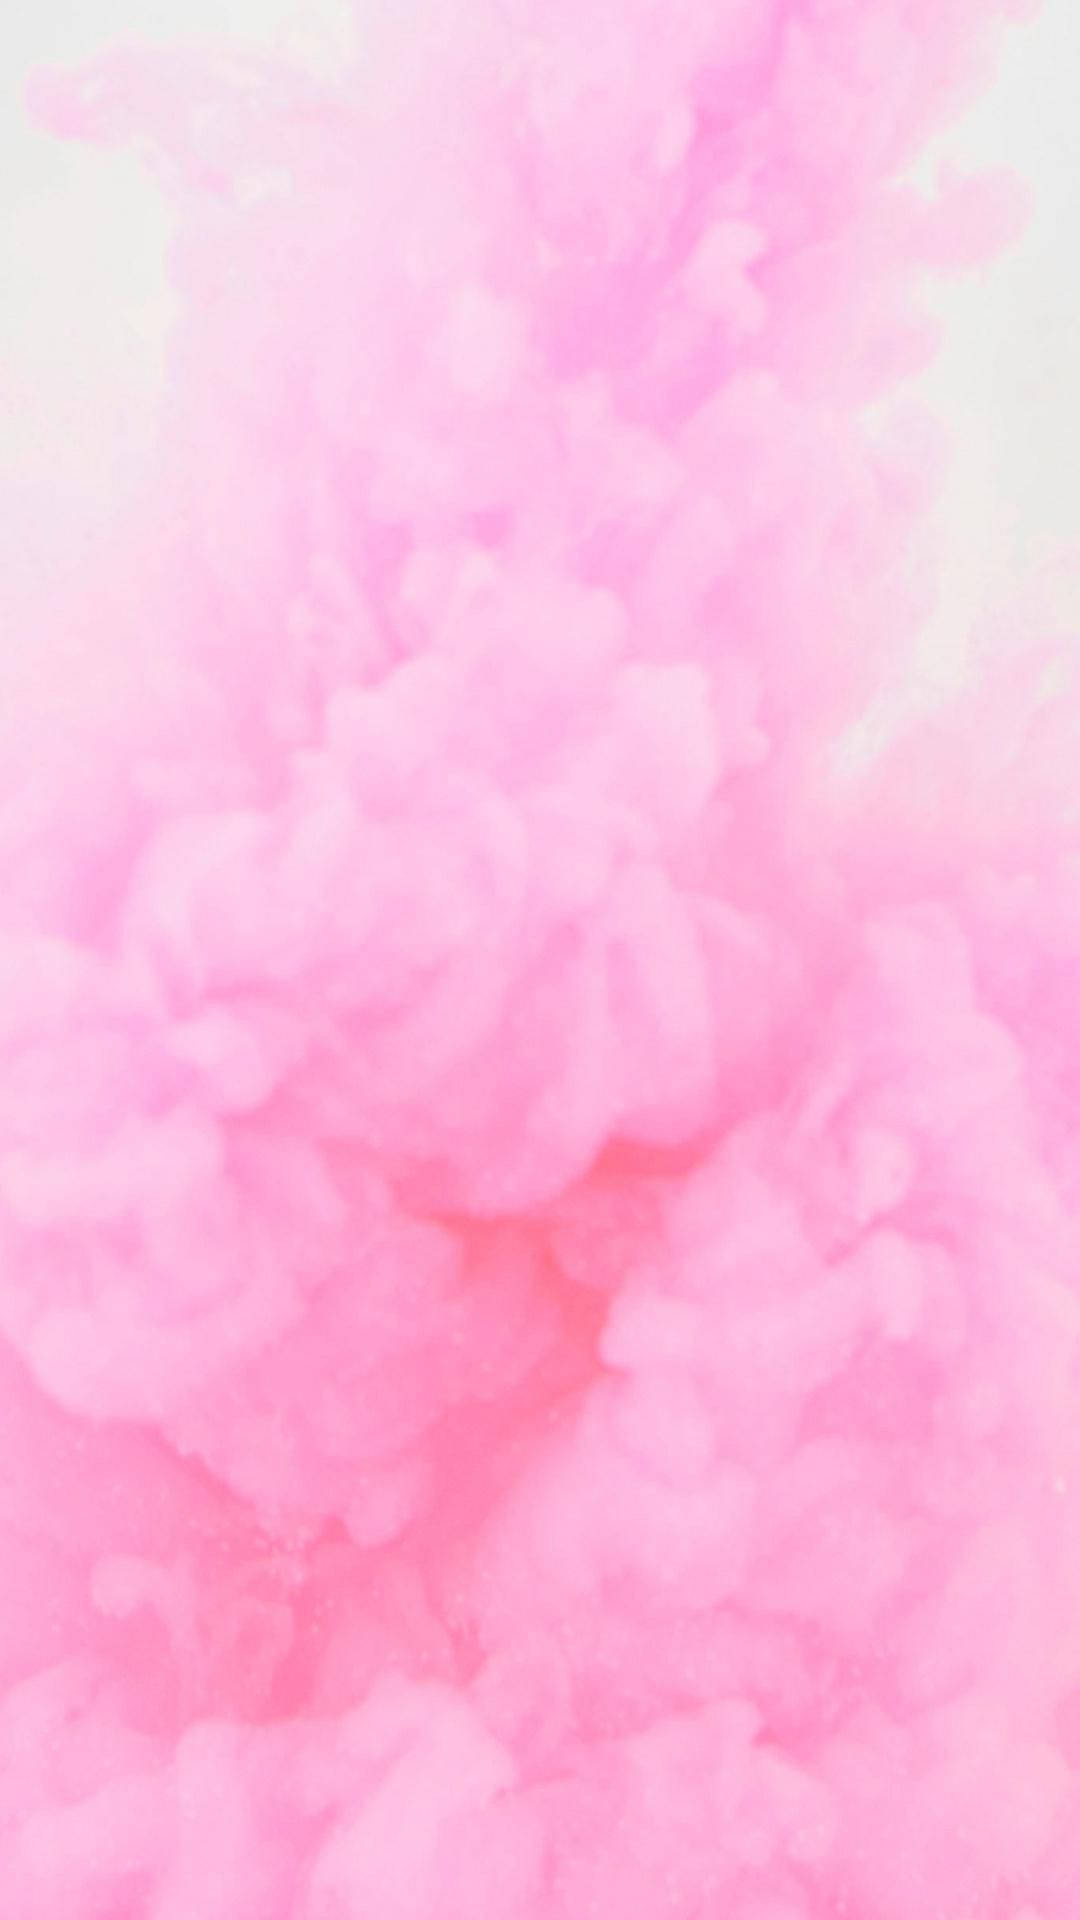 Upgrade Your Phone with a Pastel Pink iPhone Wallpaper